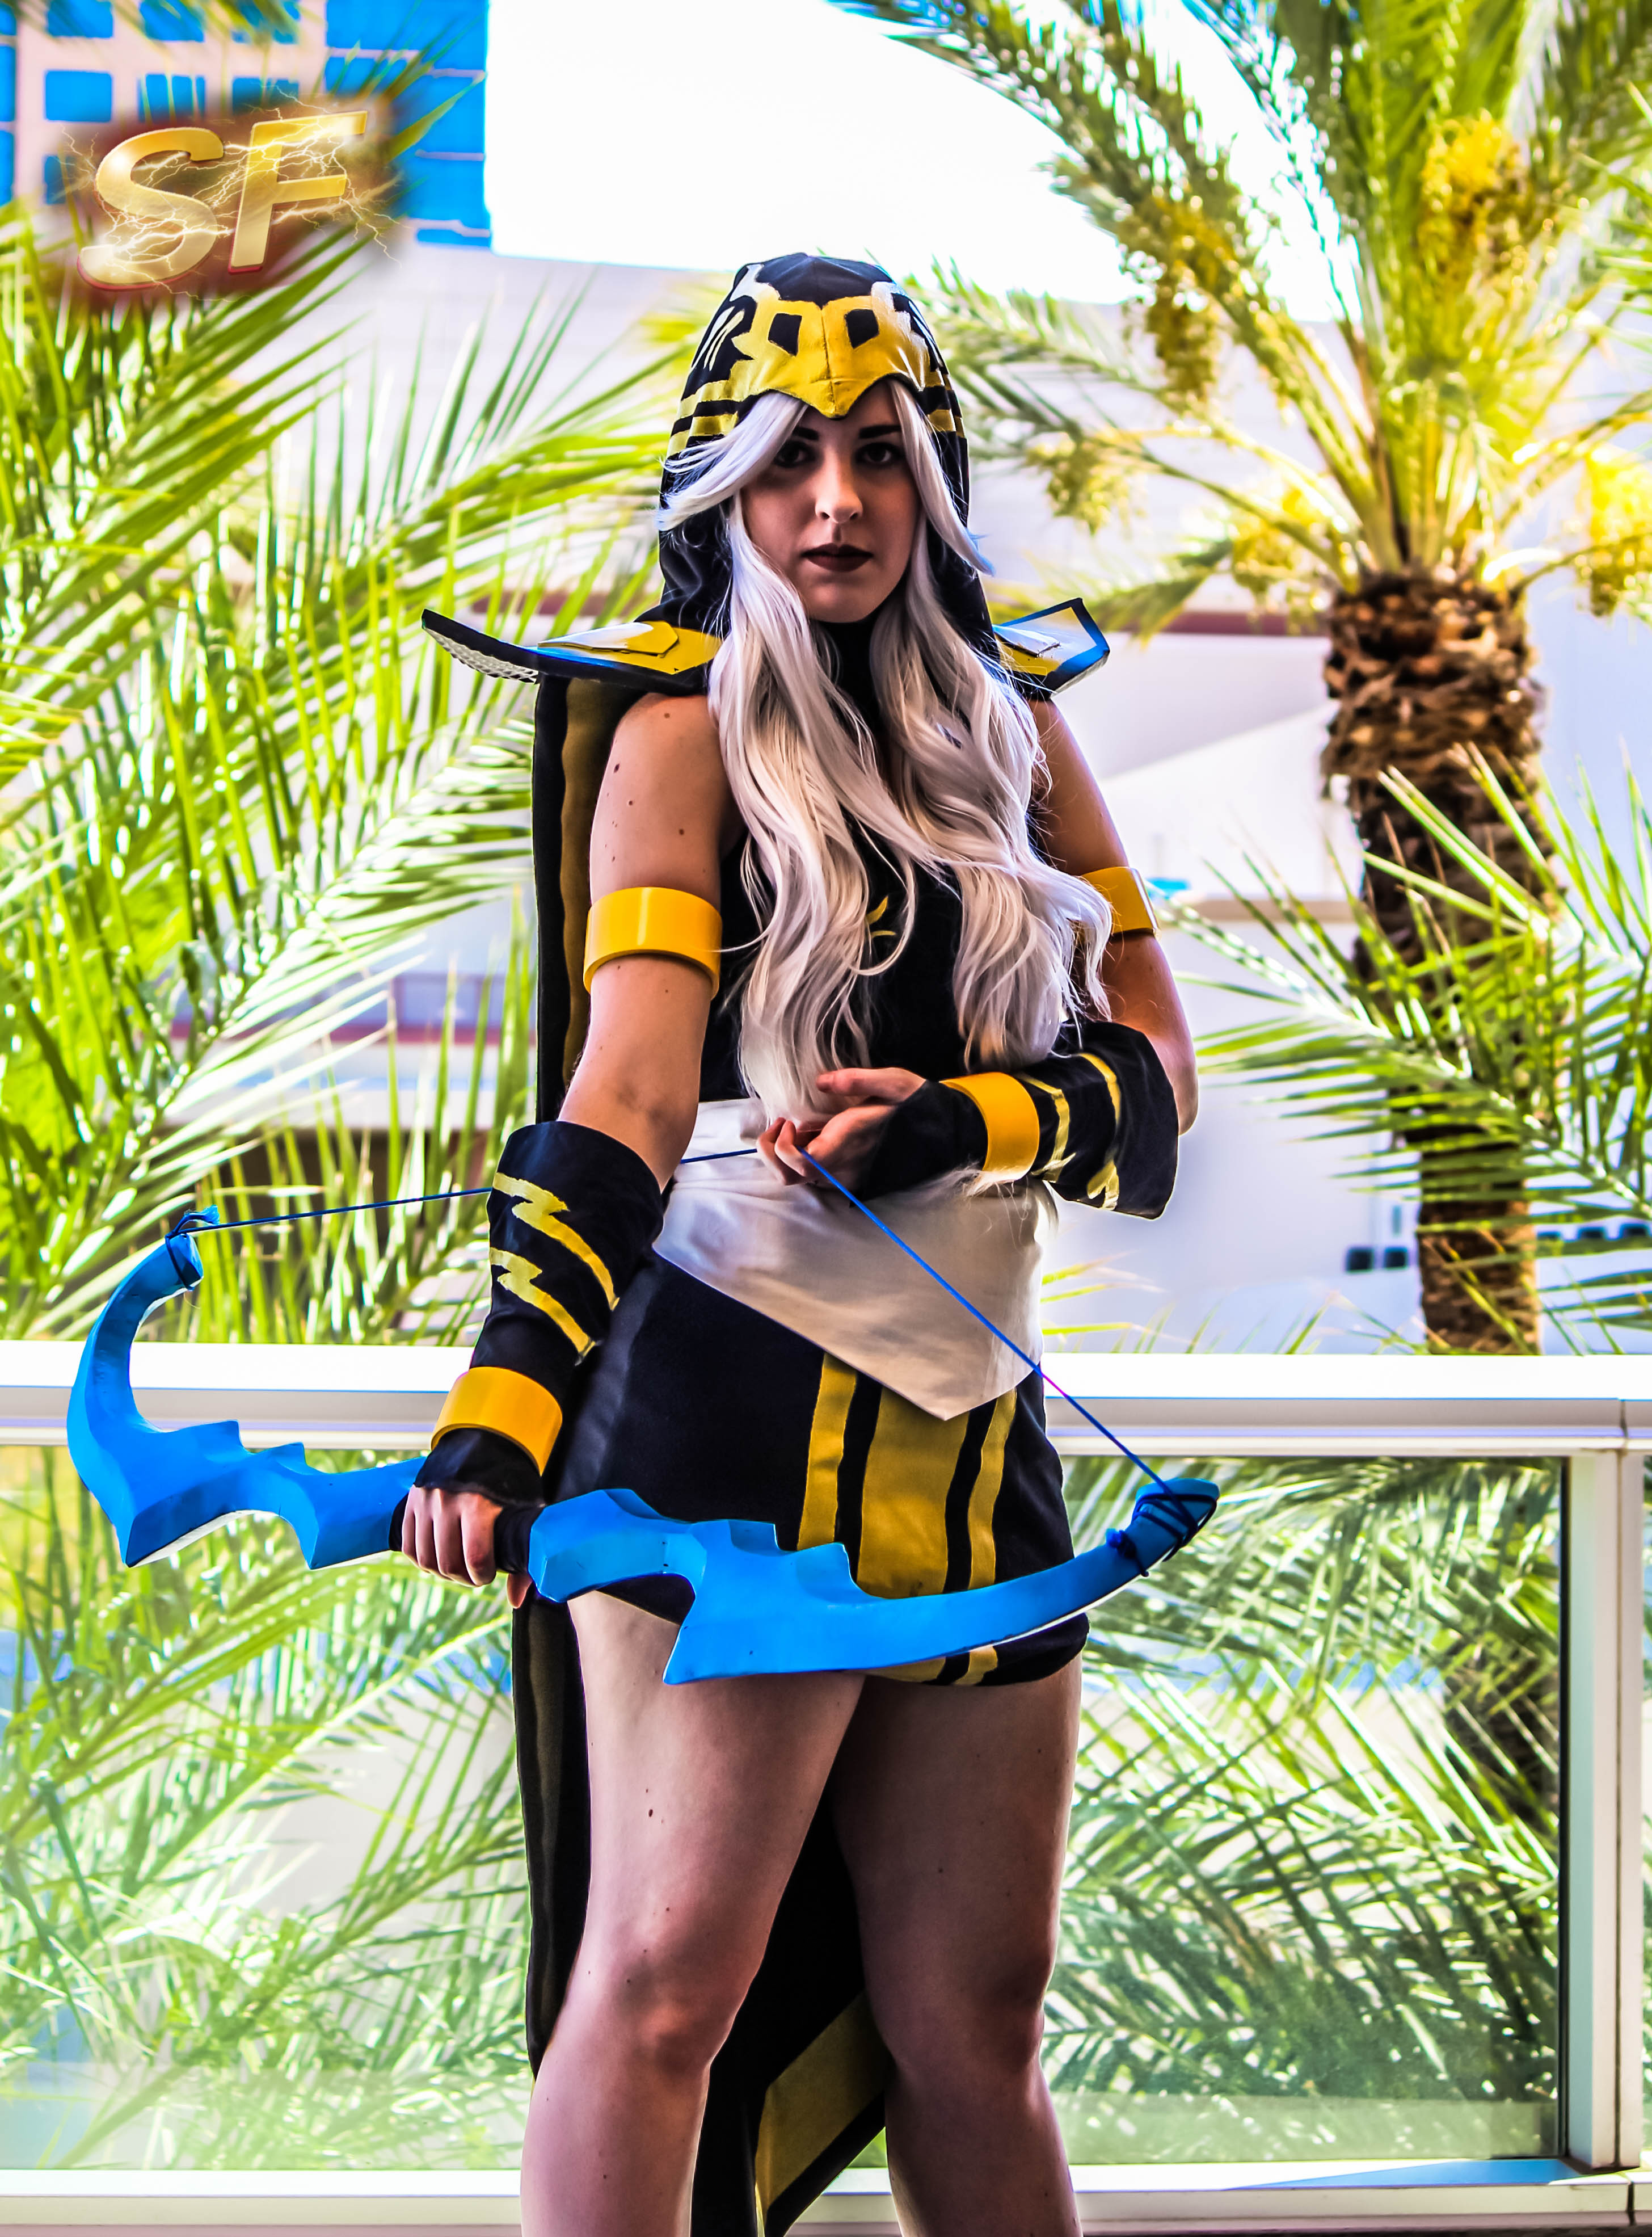 Emma Roberts as Ashe from League of Legends